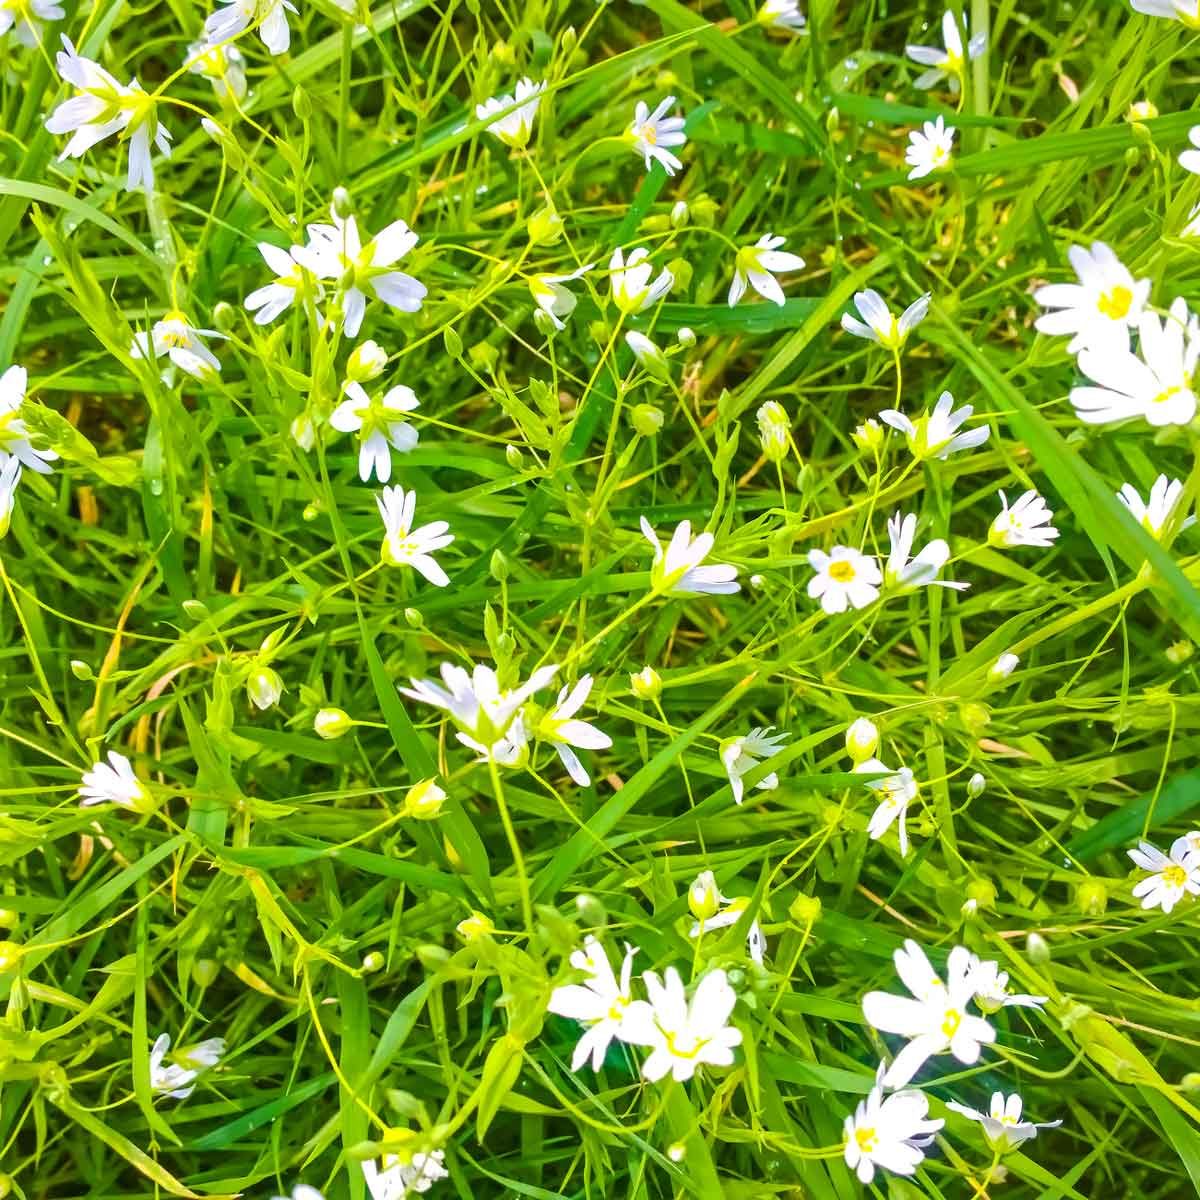 What is Chickweed and How Do I Get Rid of It? | The Family Handyman